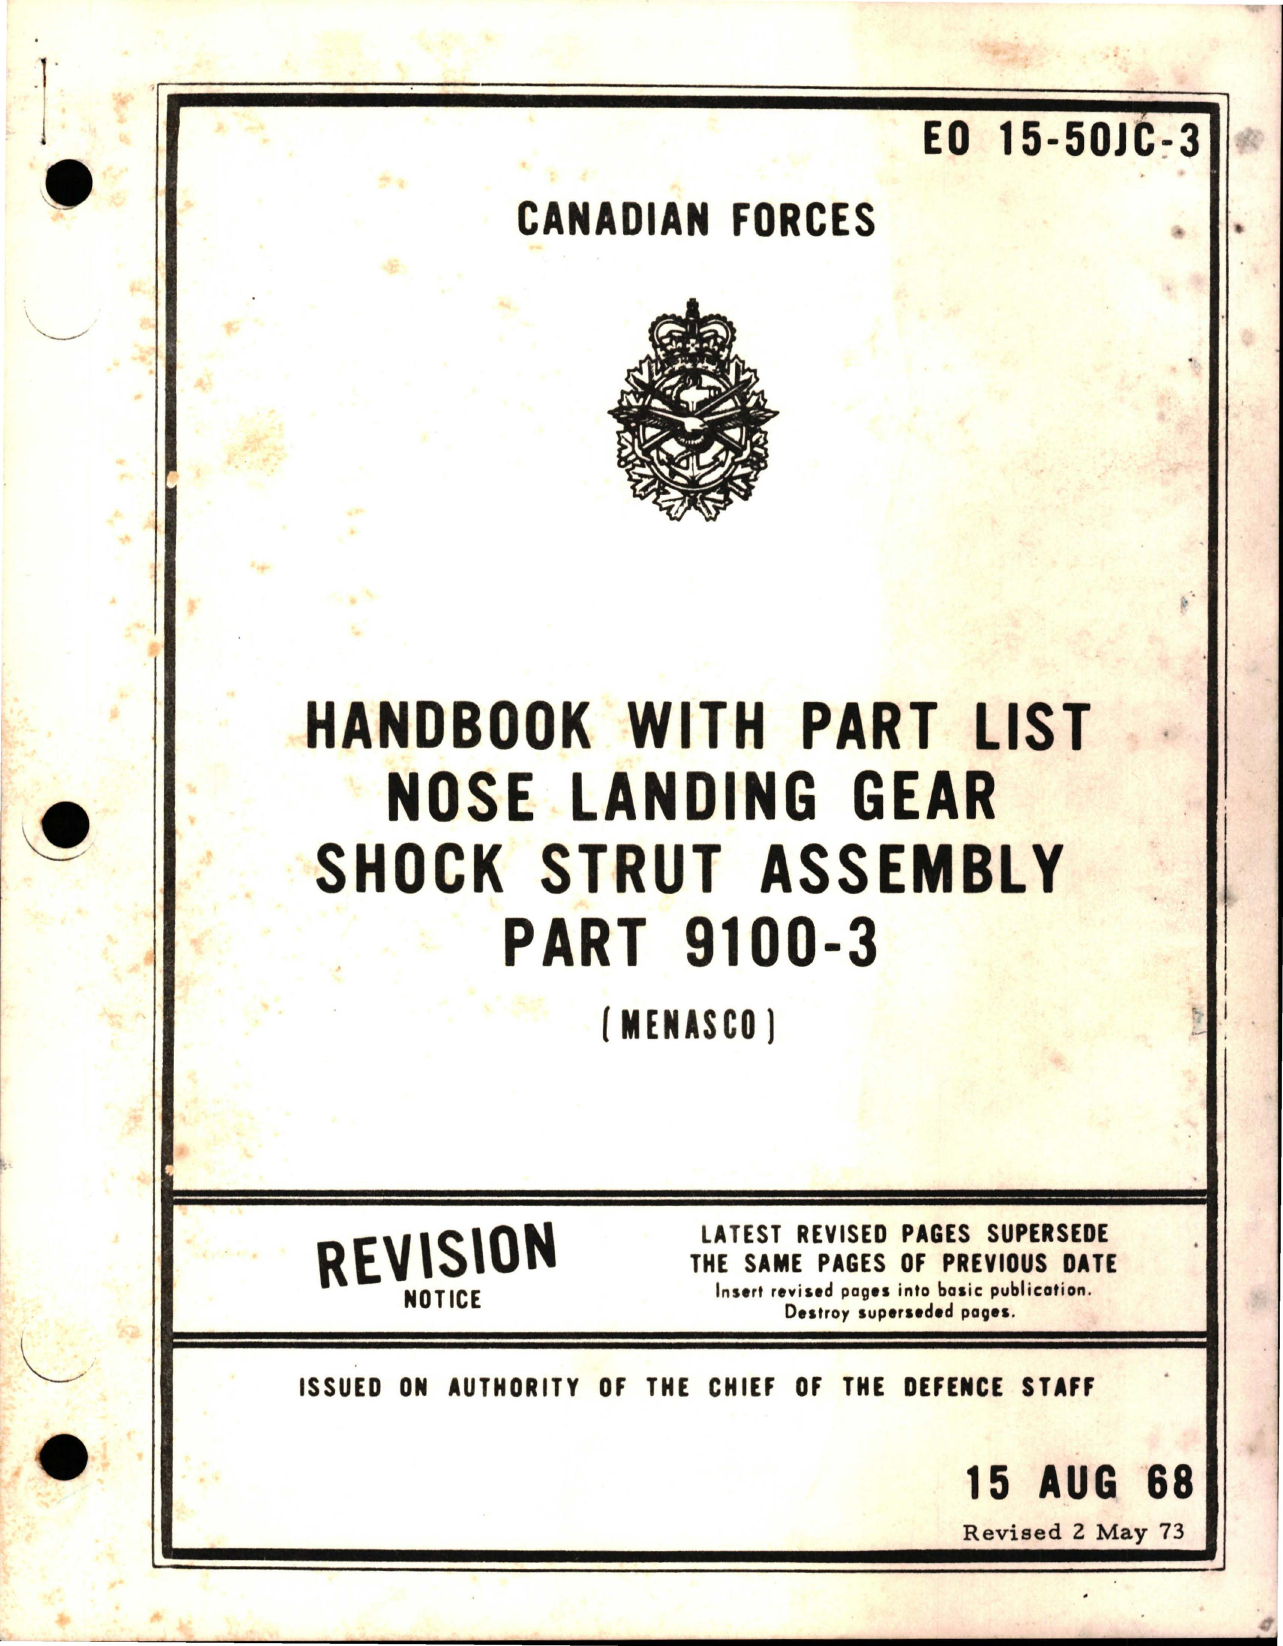 Sample page 1 from AirCorps Library document: Handbook with Parts List for Nose Landing Gear Shock Strut Assembly - Part 9100-3